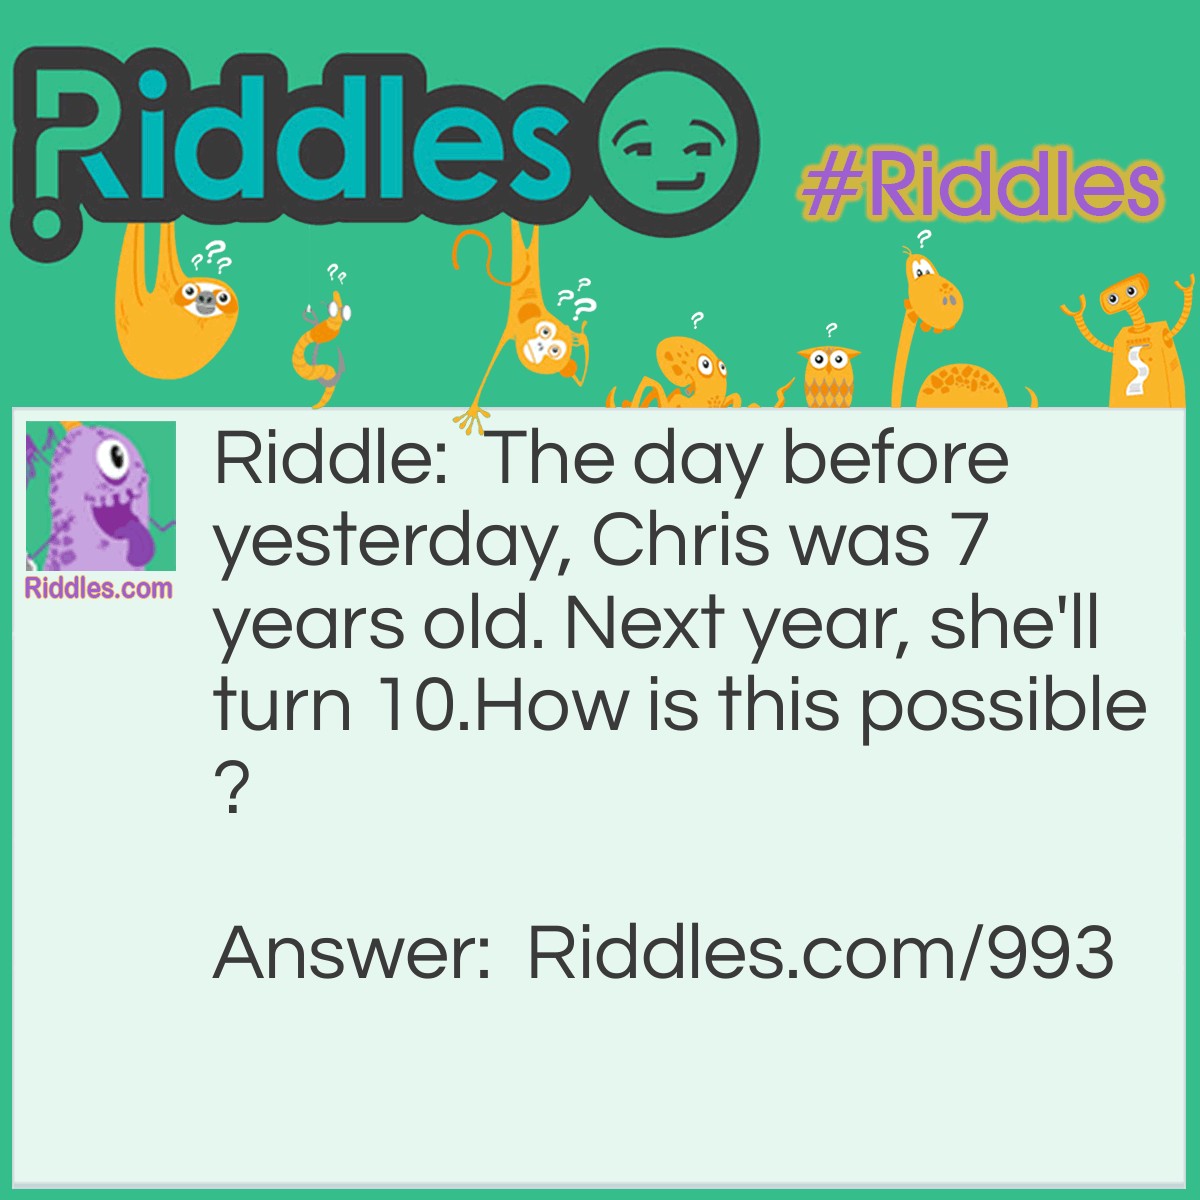 Riddle: The day before yesterday, Chris was 7 years old. Next year, she'll turn 10.
How is this possible? Answer: Today is Jan. 1st. Yesterday, December 31, was Chris's 8th birthday. On December 30, she was still 7. This year she will turn 9, and next year, she'll turn 10.